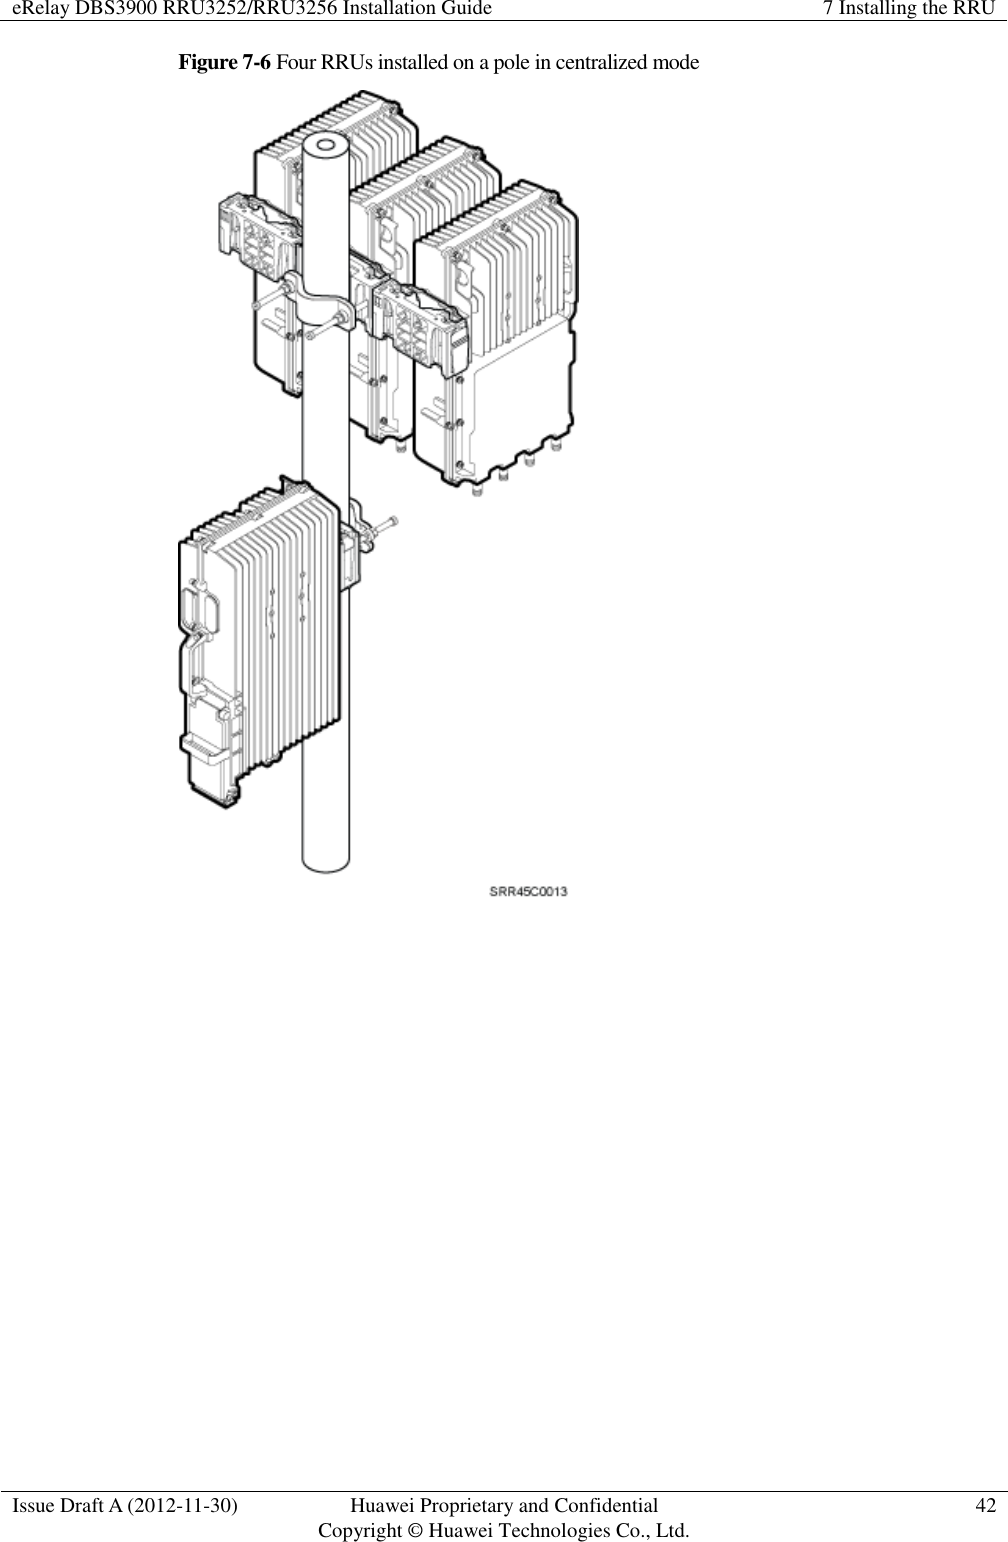 eRelay DBS3900 RRU3252/RRU3256 Installation Guide 7 Installing the RRU  Issue Draft A (2012-11-30) Huawei Proprietary and Confidential                                     Copyright © Huawei Technologies Co., Ltd. 42  Figure 7-6 Four RRUs installed on a pole in centralized mode   